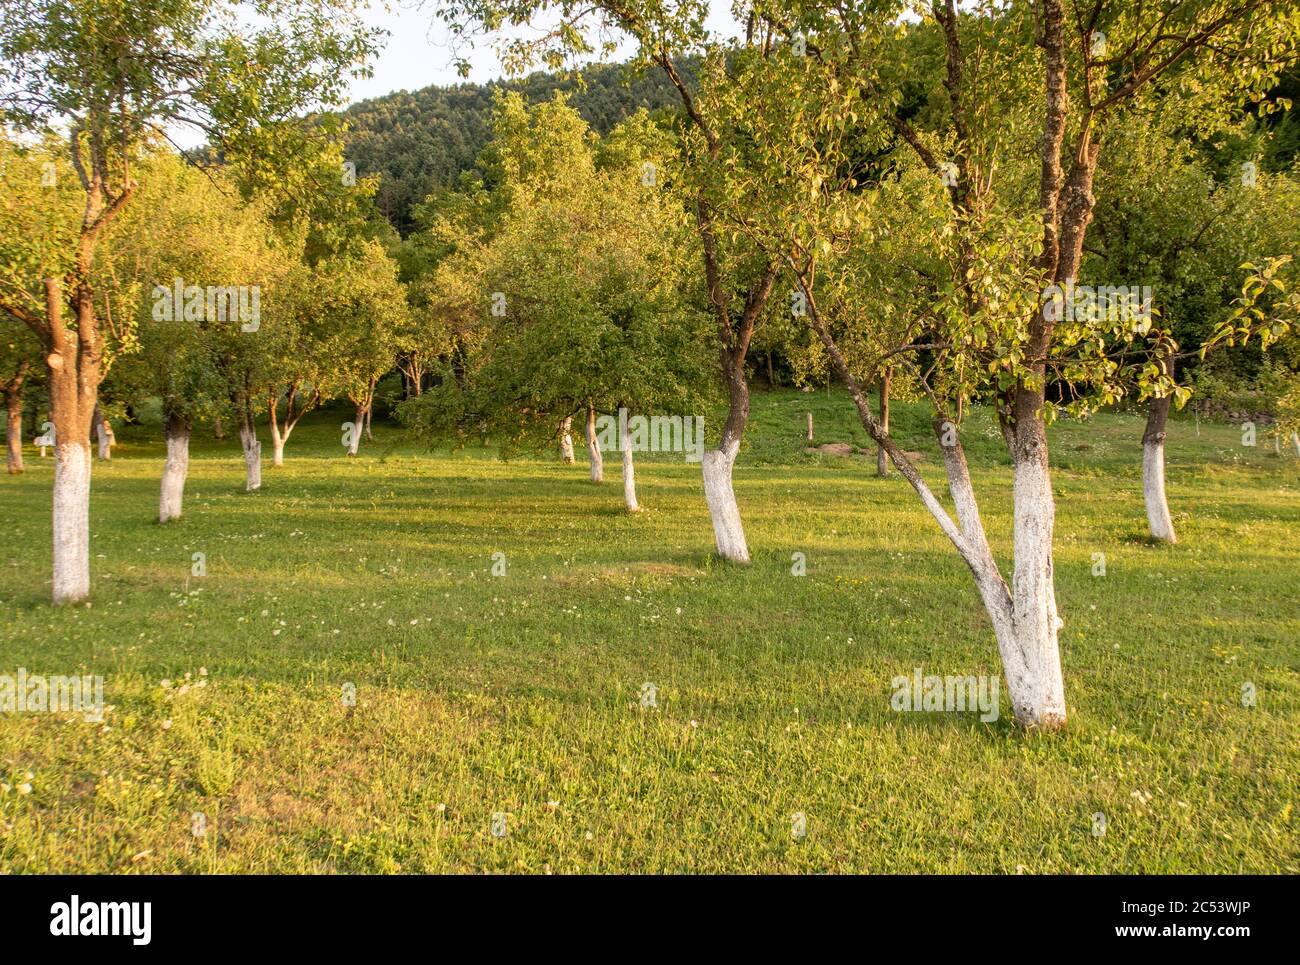 Fruit tree orchard with trees that have been white washed (lime/water painted) to help protect against infection/infestation.  Lika, Croatia Stock Photo